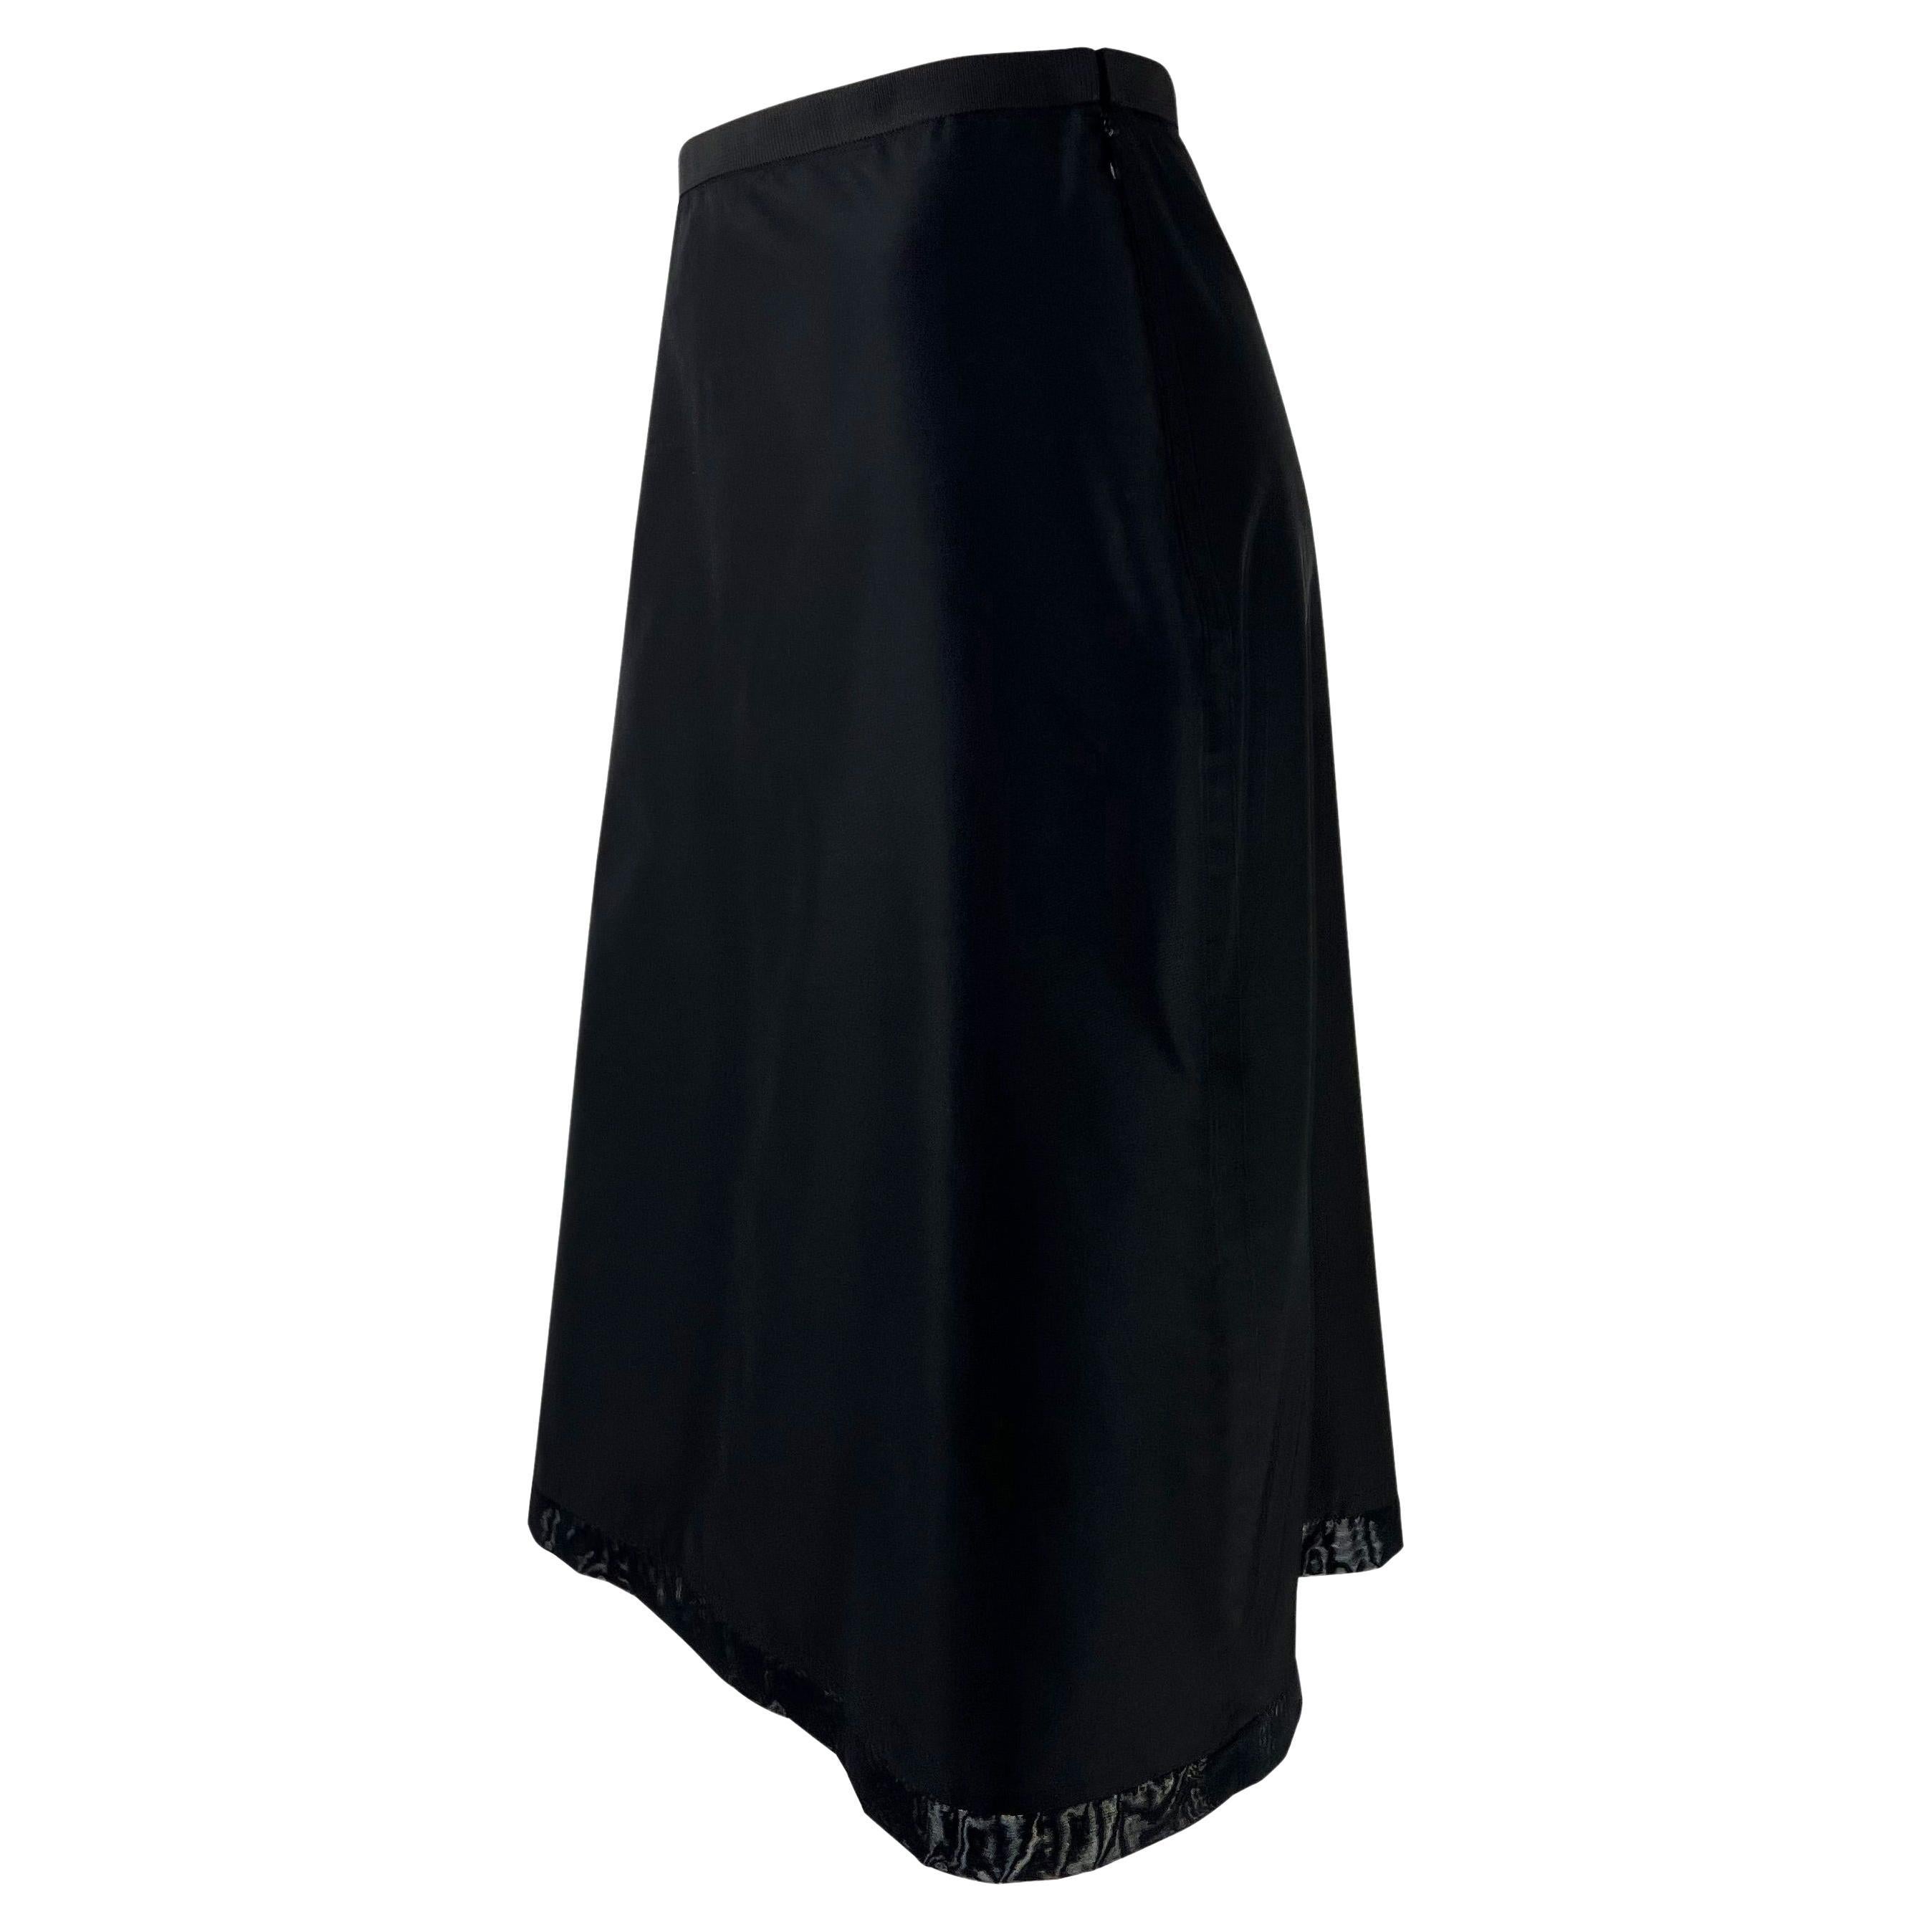 Presenting an black nylon Gucci skirt, designed by Tom Ford. This fabulously chic skirt, from 1999, features an a-line cut and is made complete with a black mesh trim detail at the hem. This skirt is the perfect unique addition to any Gucci by Tom